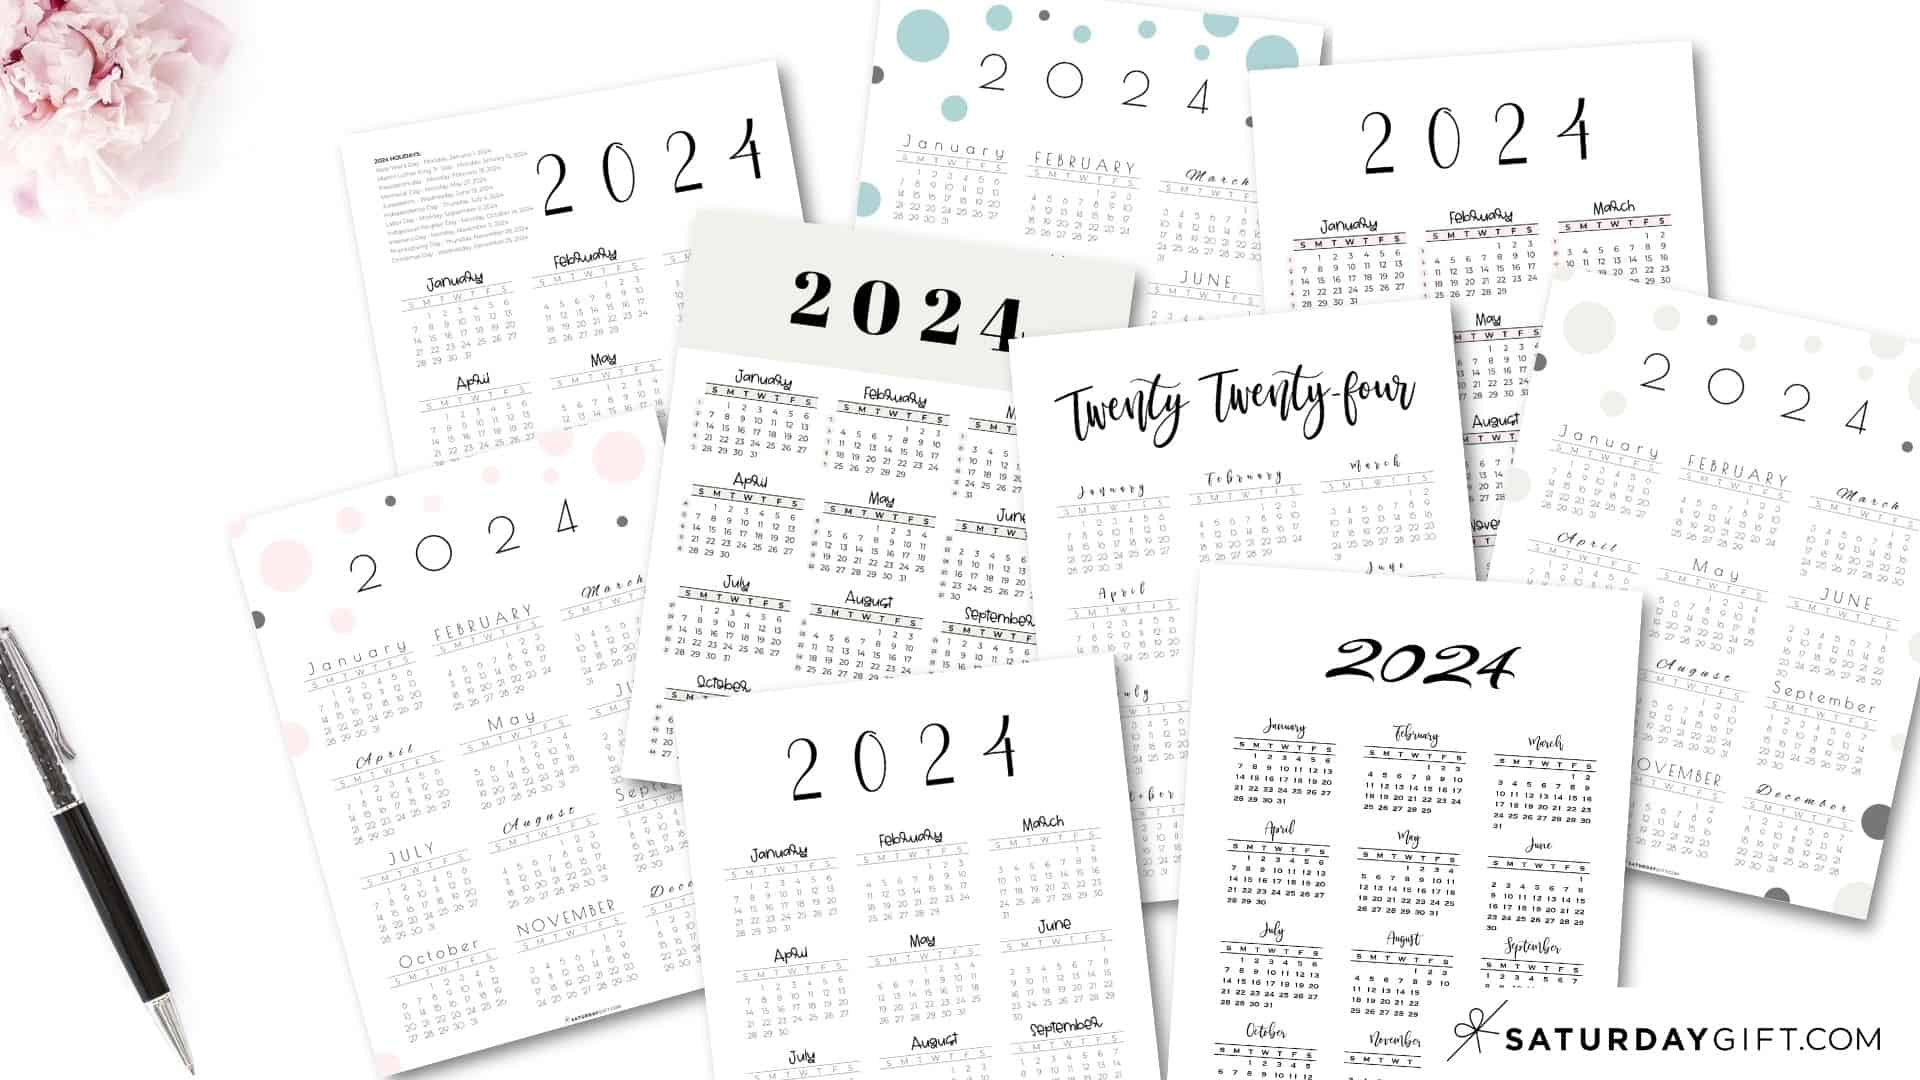 What Calendar Can I Reuse For 2024? What Year Is The Same As 2024? | Years With Same Calendar As 2024